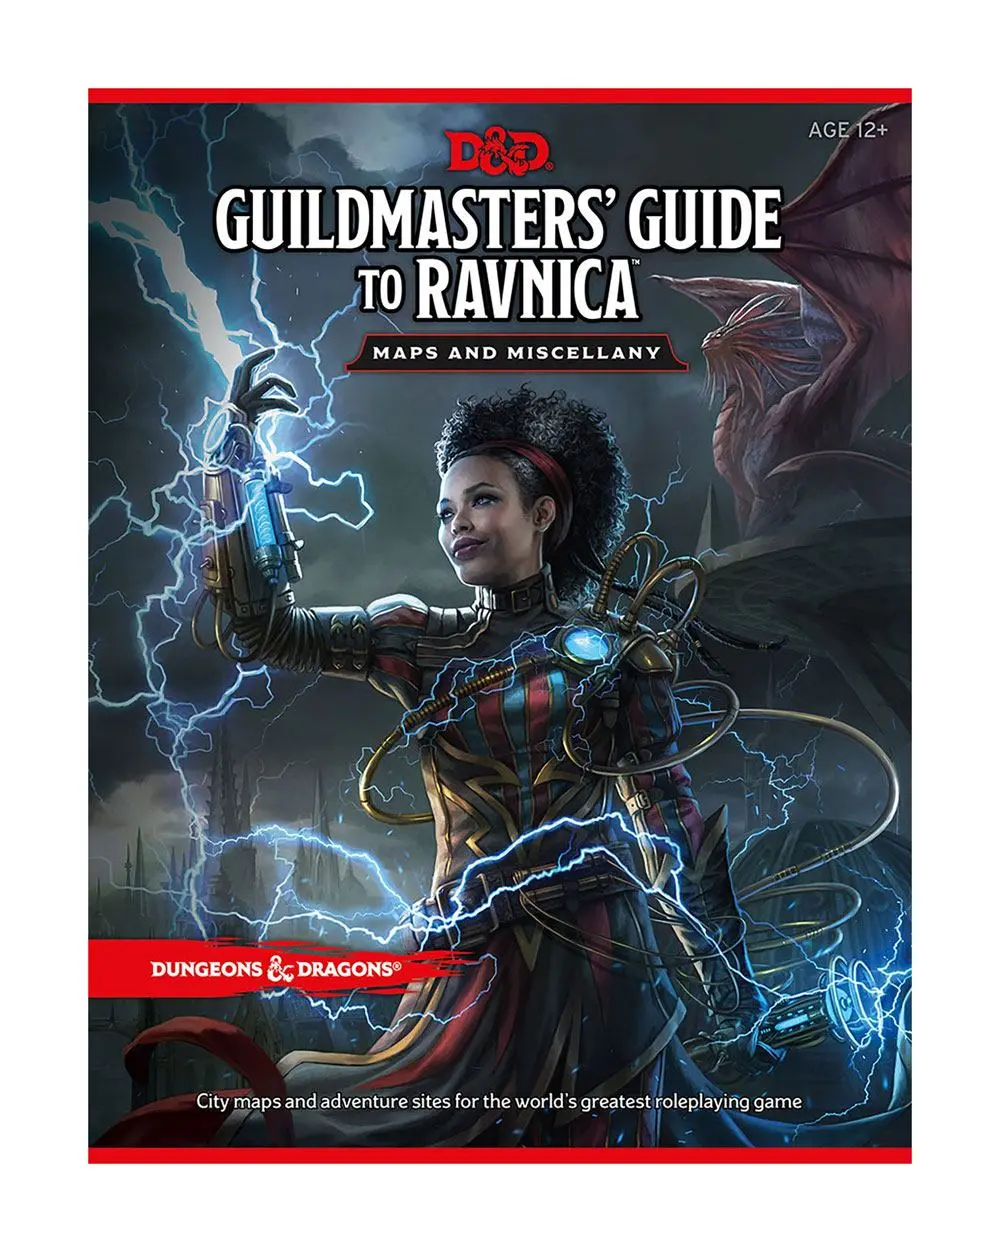 Dungeons & Dragons RPG Guildmasters' Guide to Ravnica - Maps & Miscellany english termékfotó